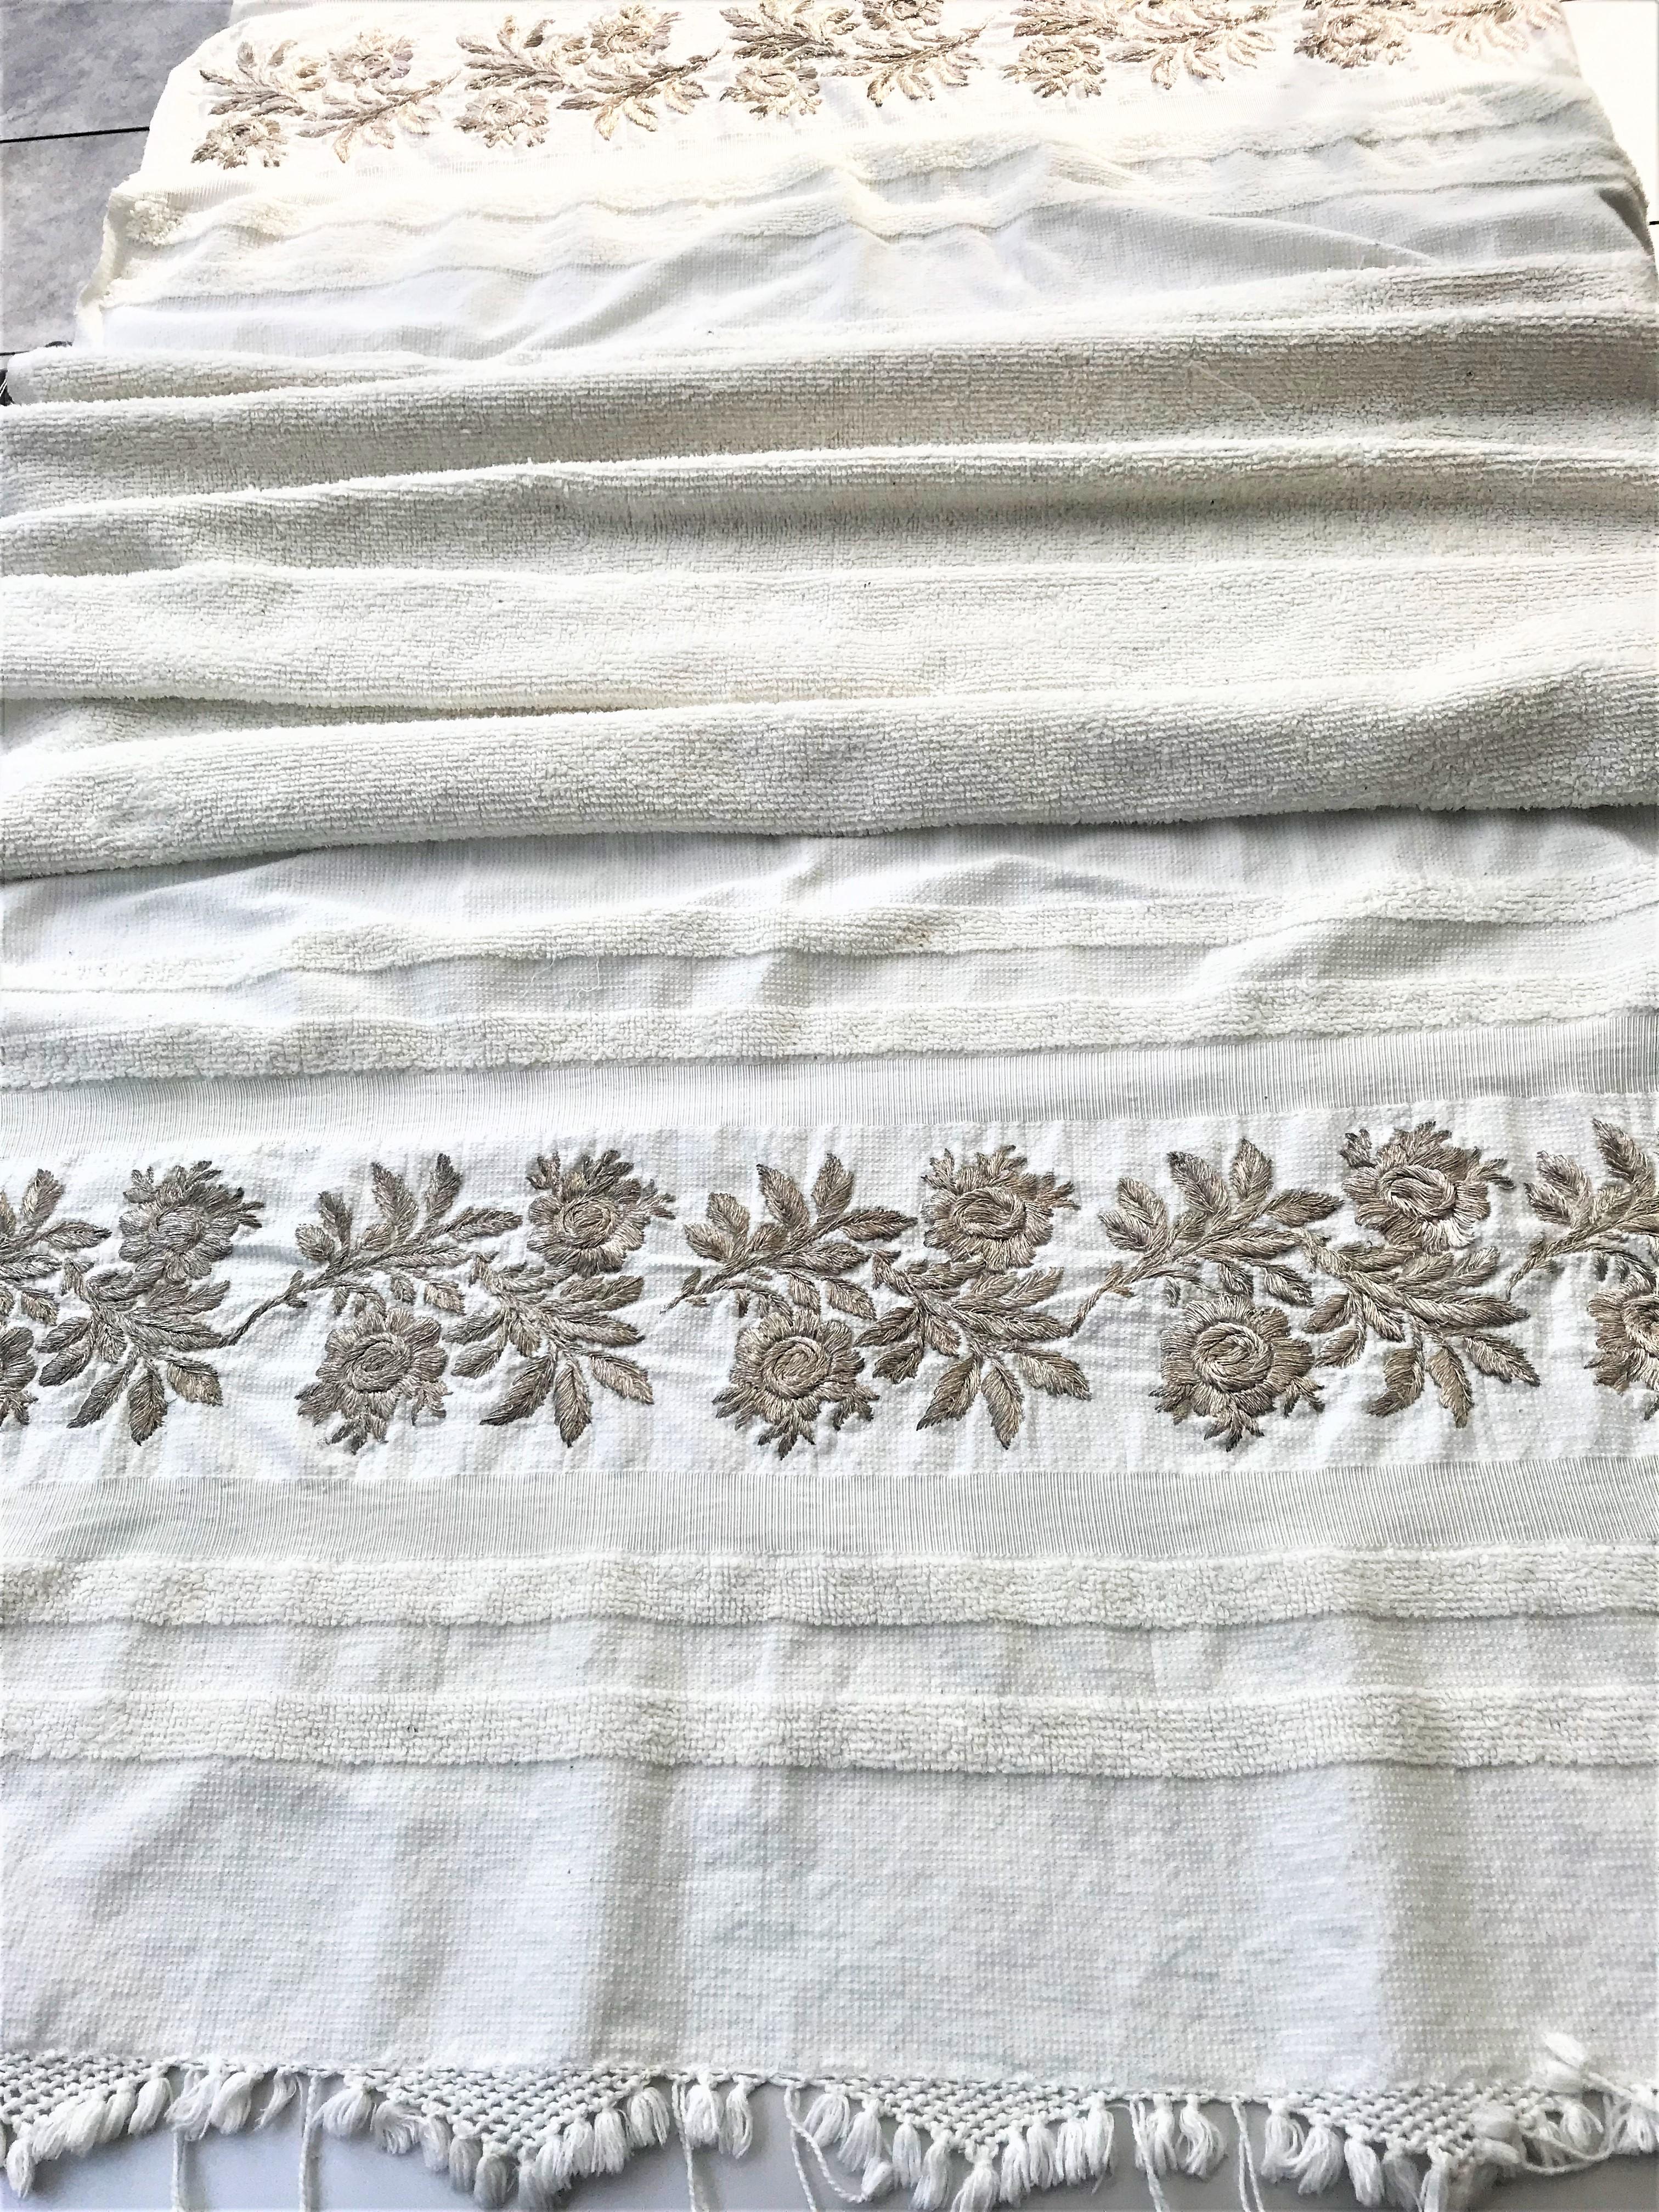 Beautiful antique large and a small off-white hammam towel with large flowers and leaves embroidered with a silver thread. You can use it as a beach towel - bath towel picnic blanket, it is super comfortable and soft.
Measurement: The large one, 